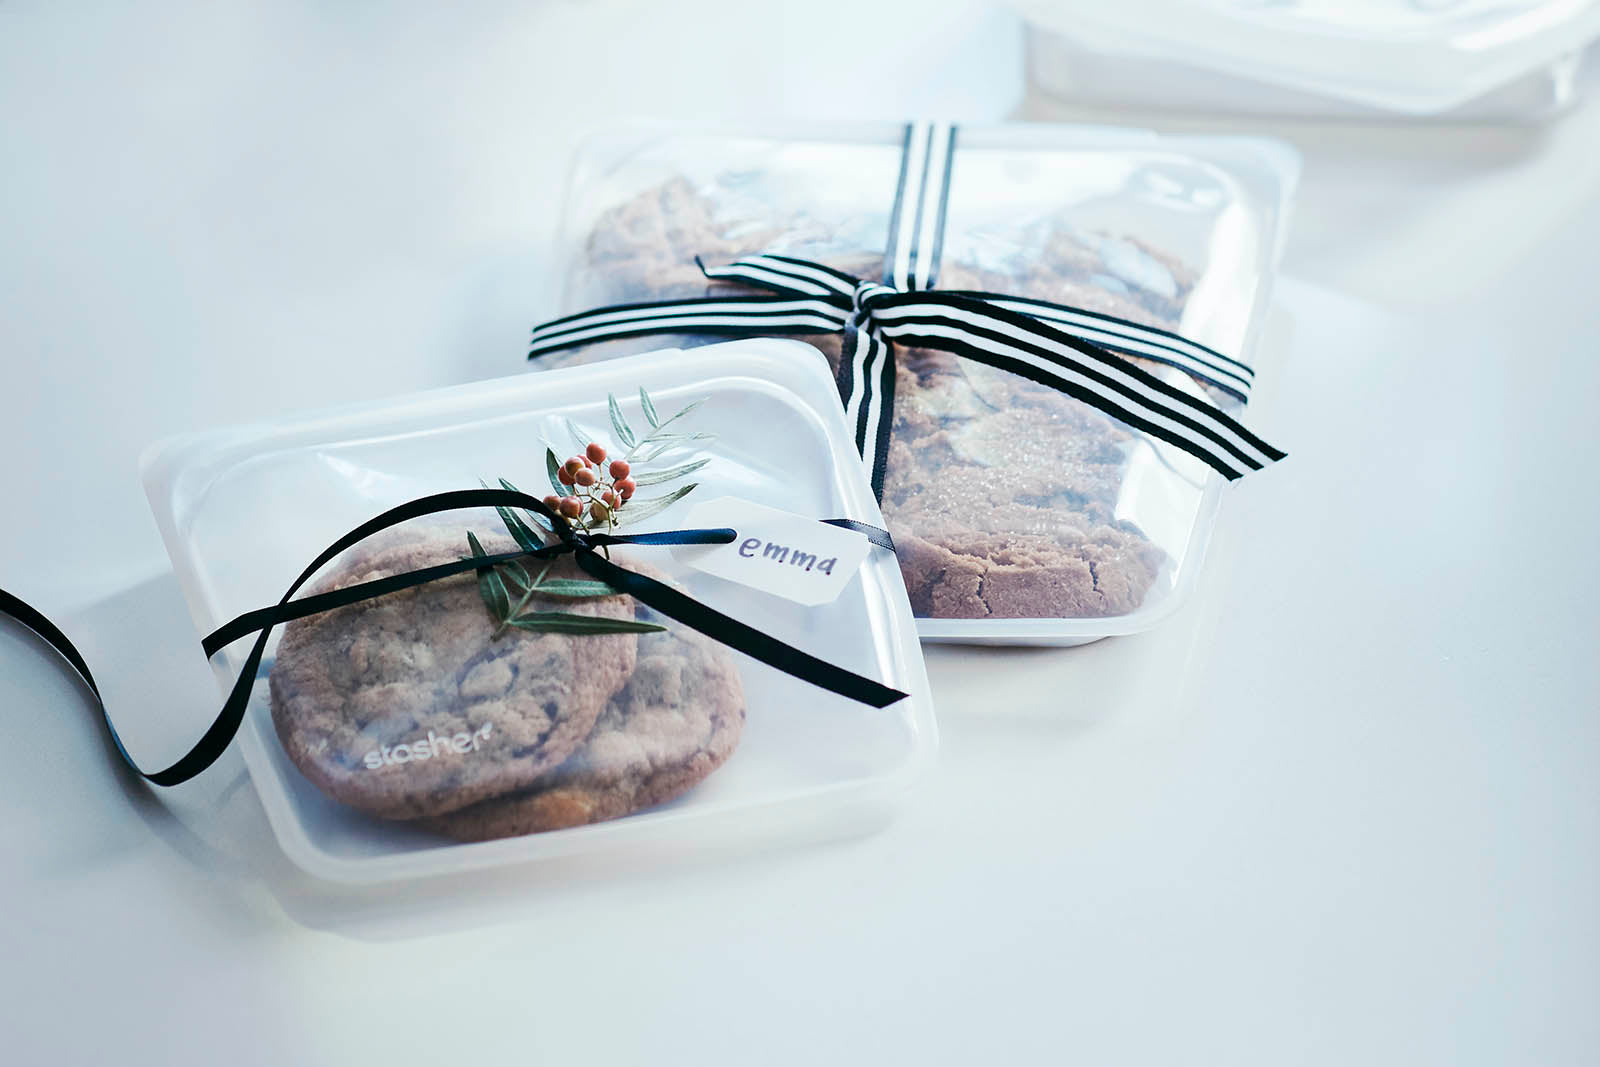 Holiday cookie recipes from Stasher Bag